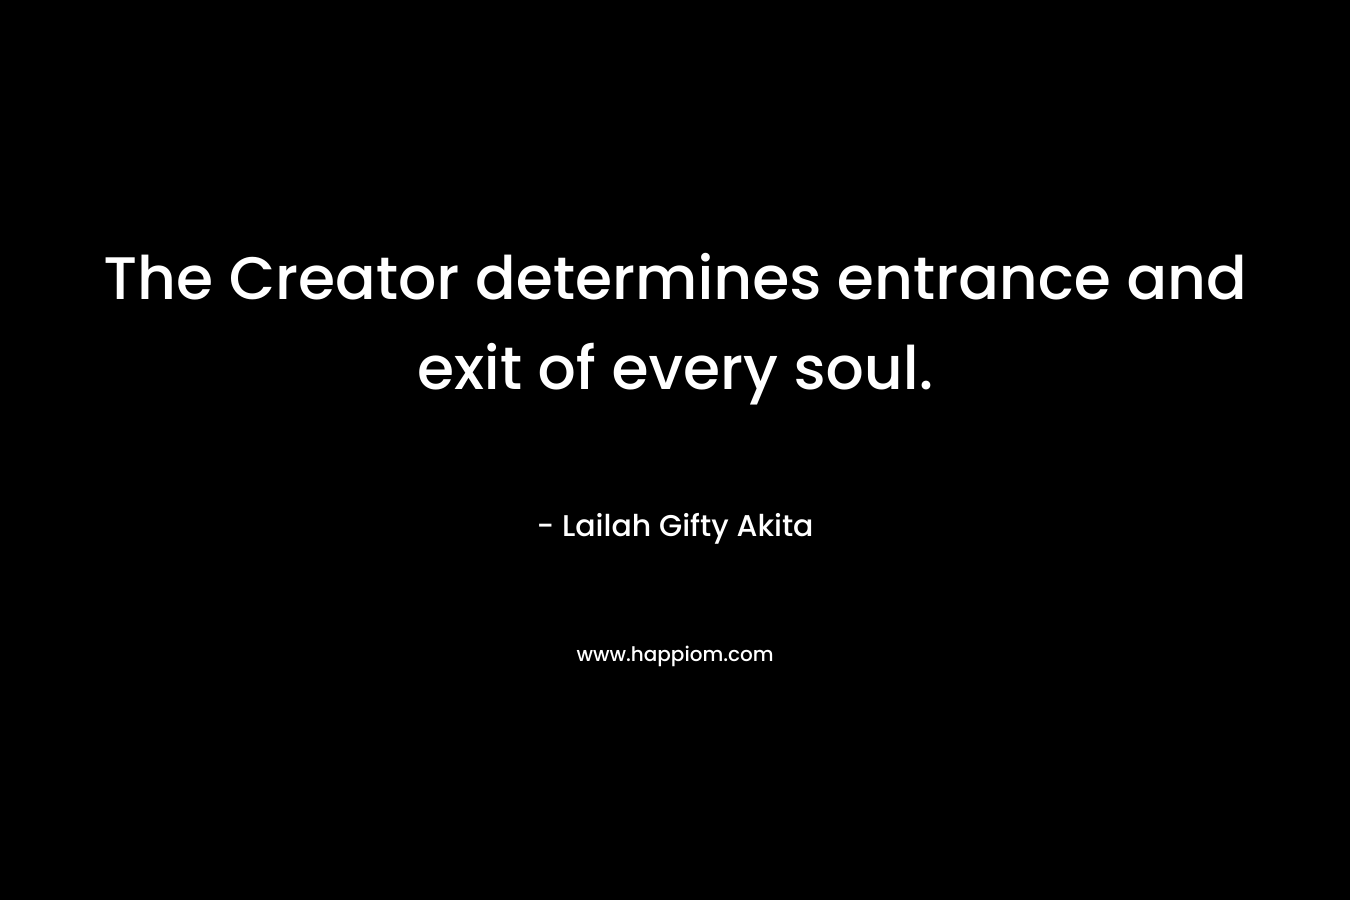 The Creator determines entrance and exit of every soul.